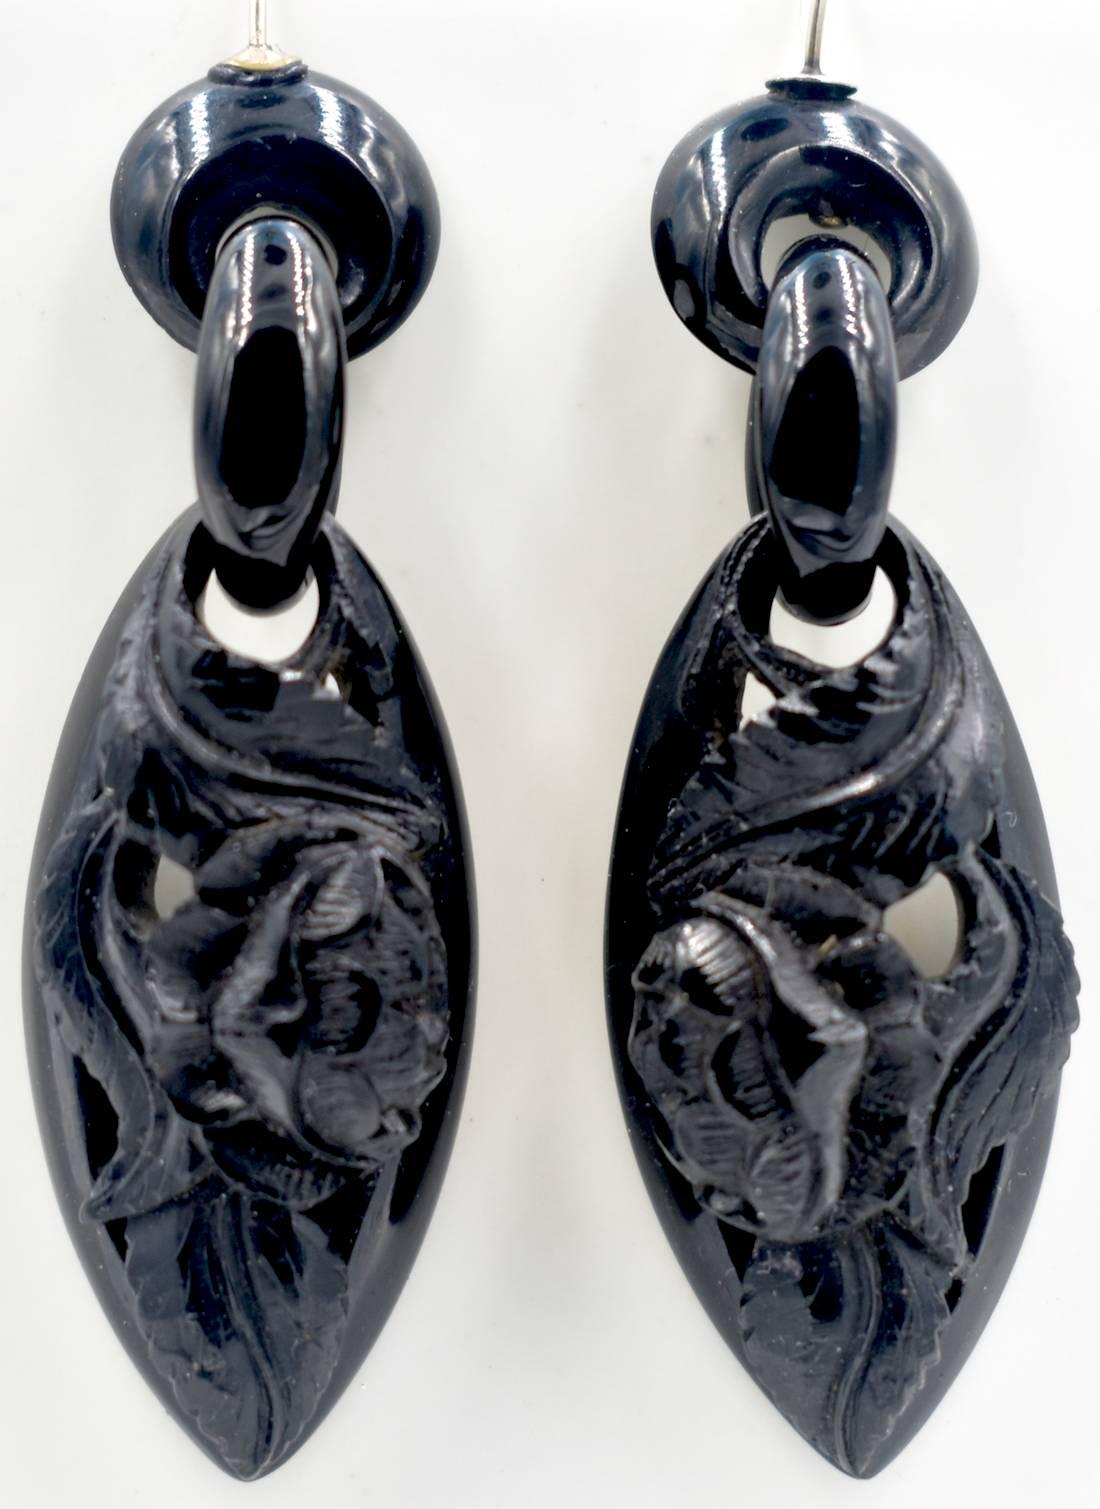 Striking Victorian Whitby jet earrings with a floral design. Jet jewelry became popular after the death of Prince Albert in 1861 when the court went into official mourning. These striking earrings measure 2 1/2" long and 3/4" at their